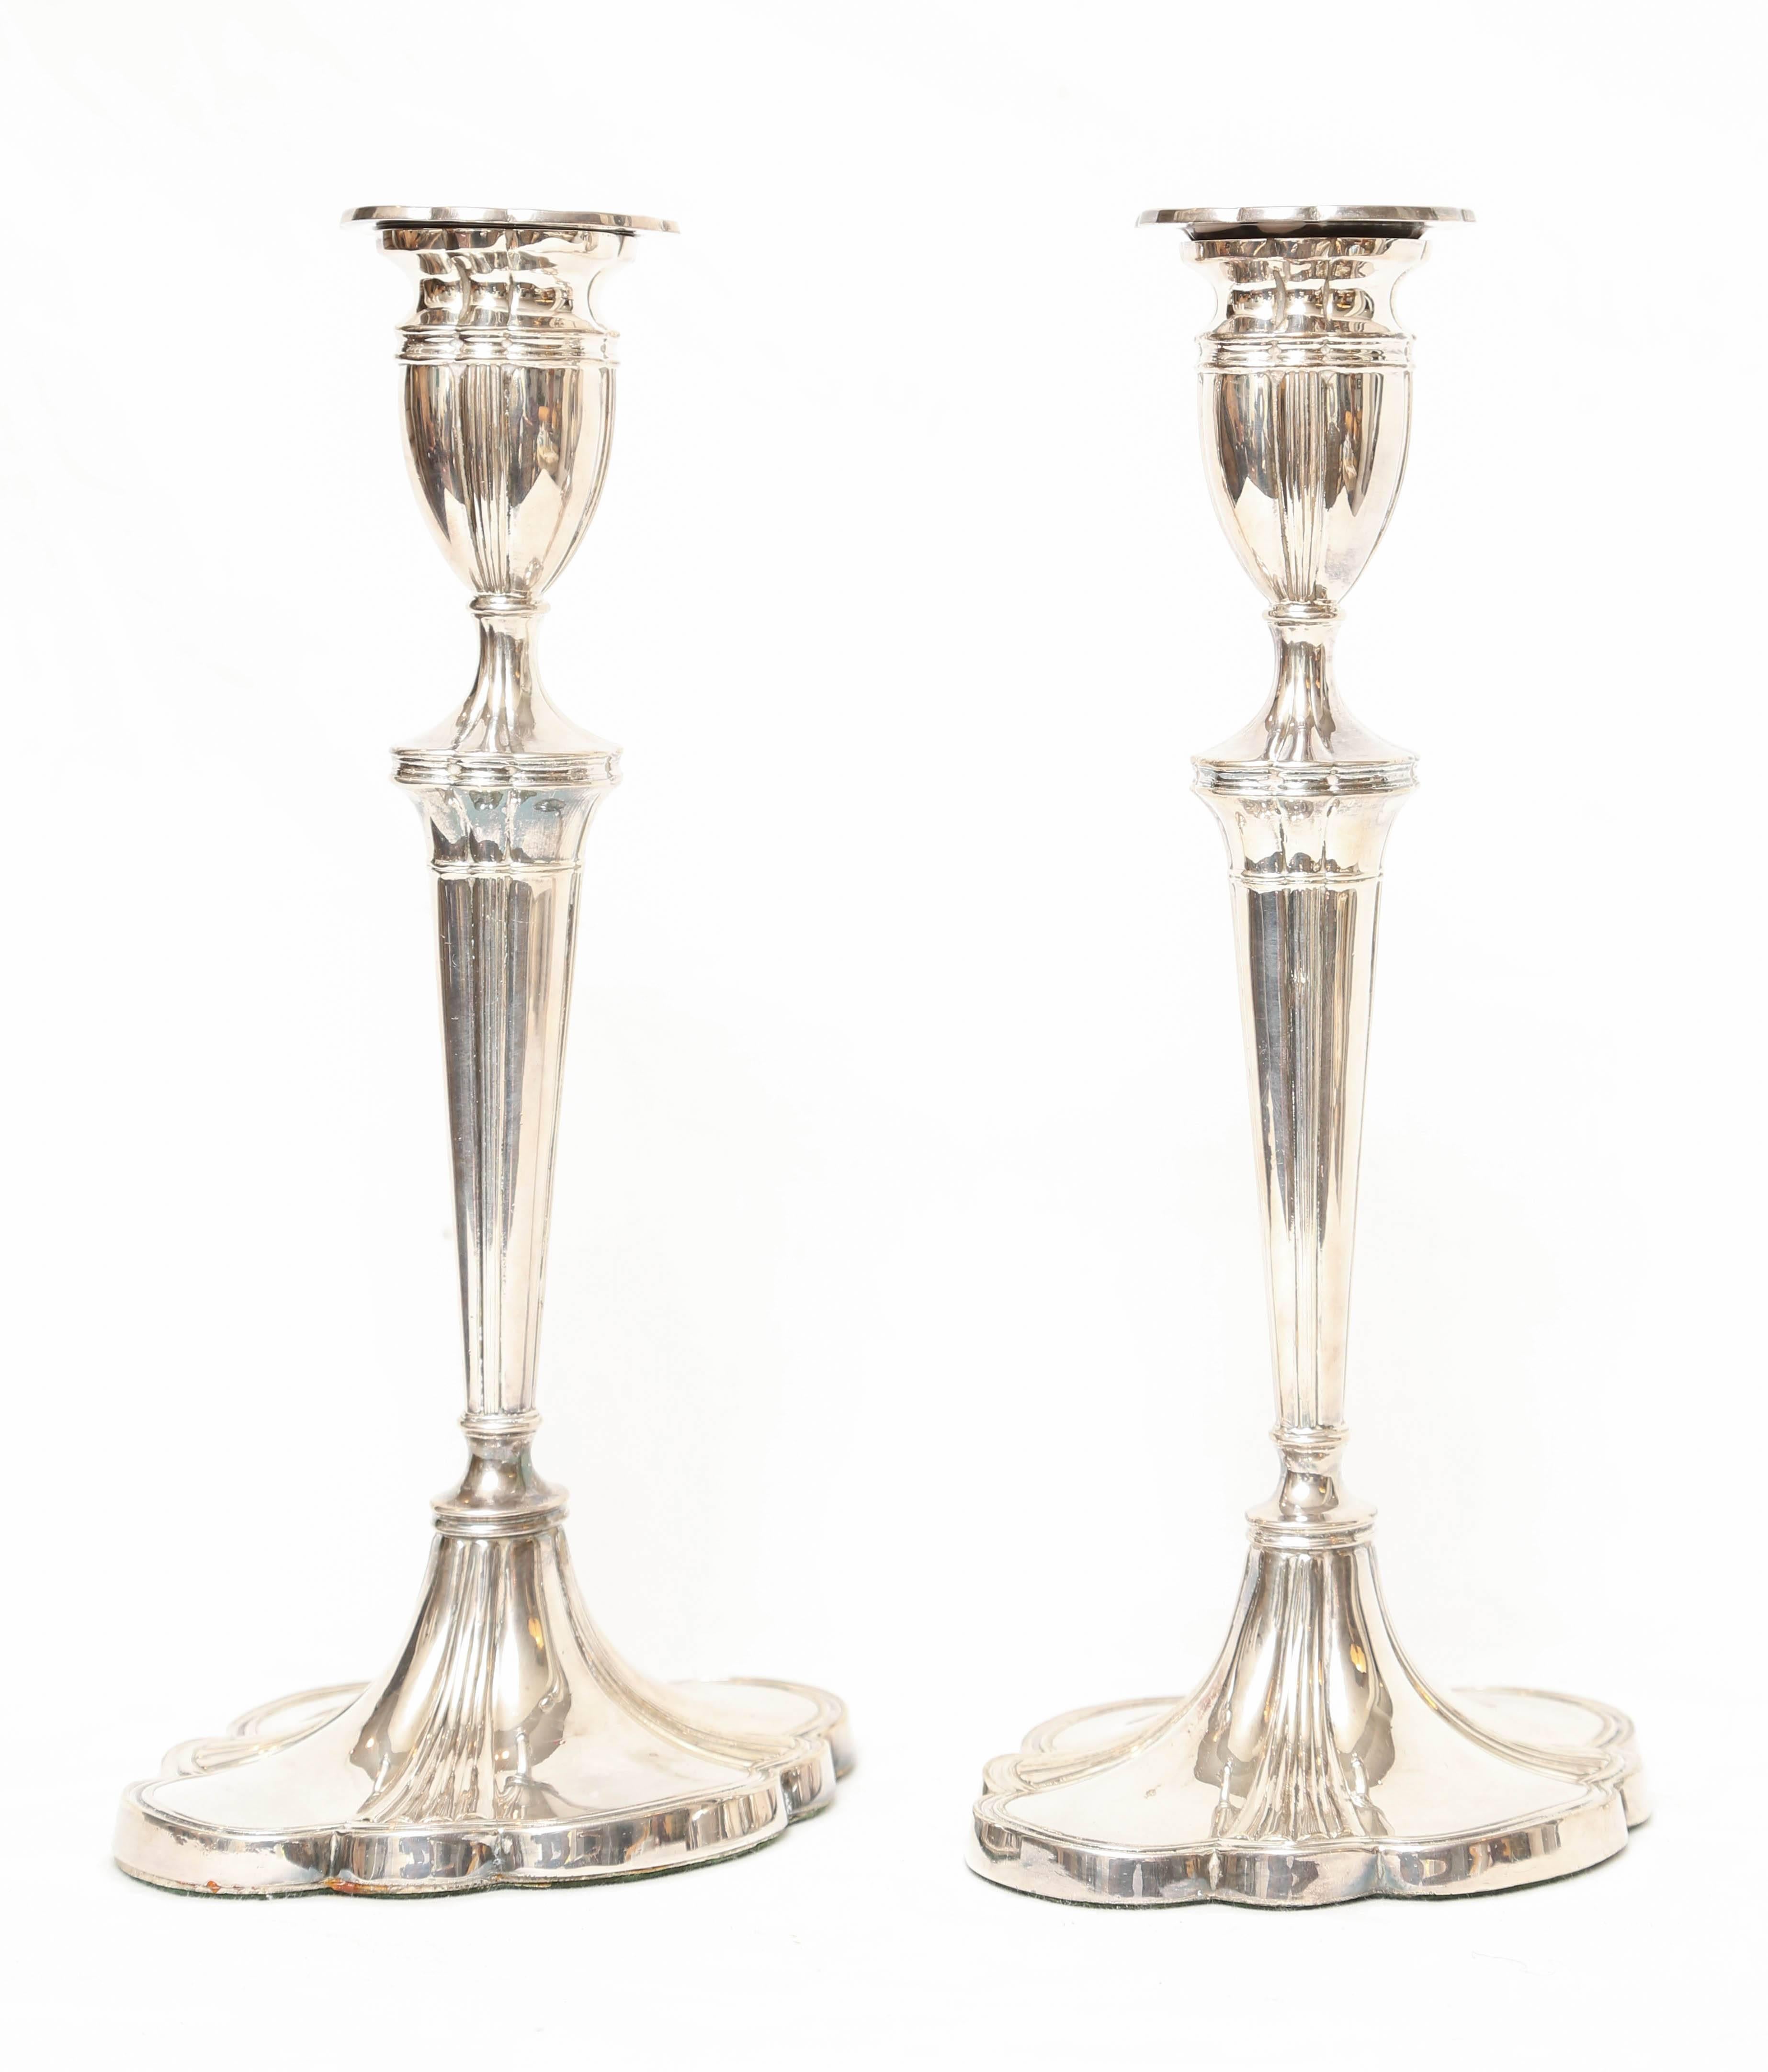 Elegant design, London maker, weighted. A finely detailed pair.